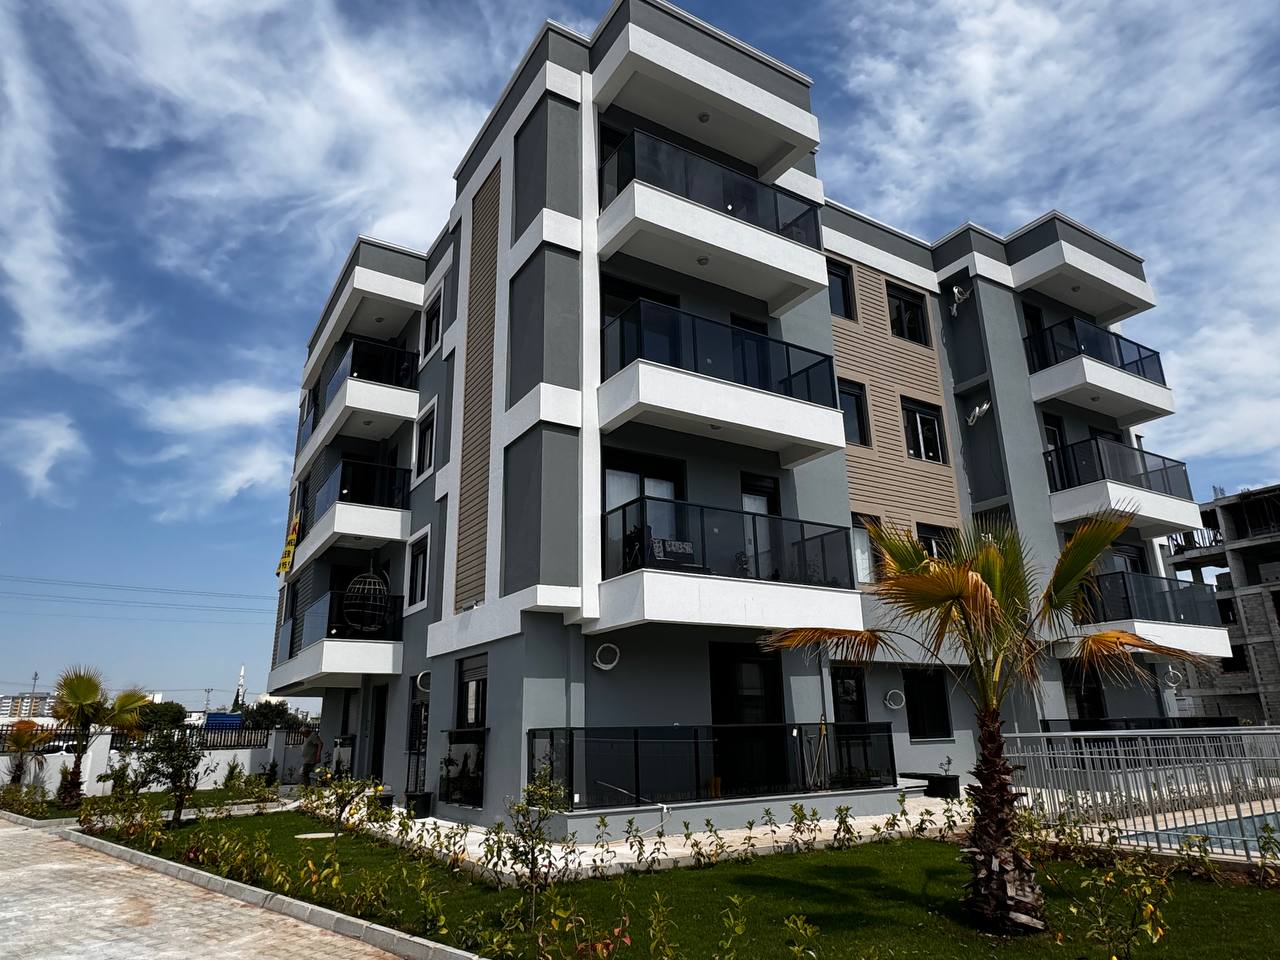 New apartment in installments for a residence permit in Antalya, 2 + 1